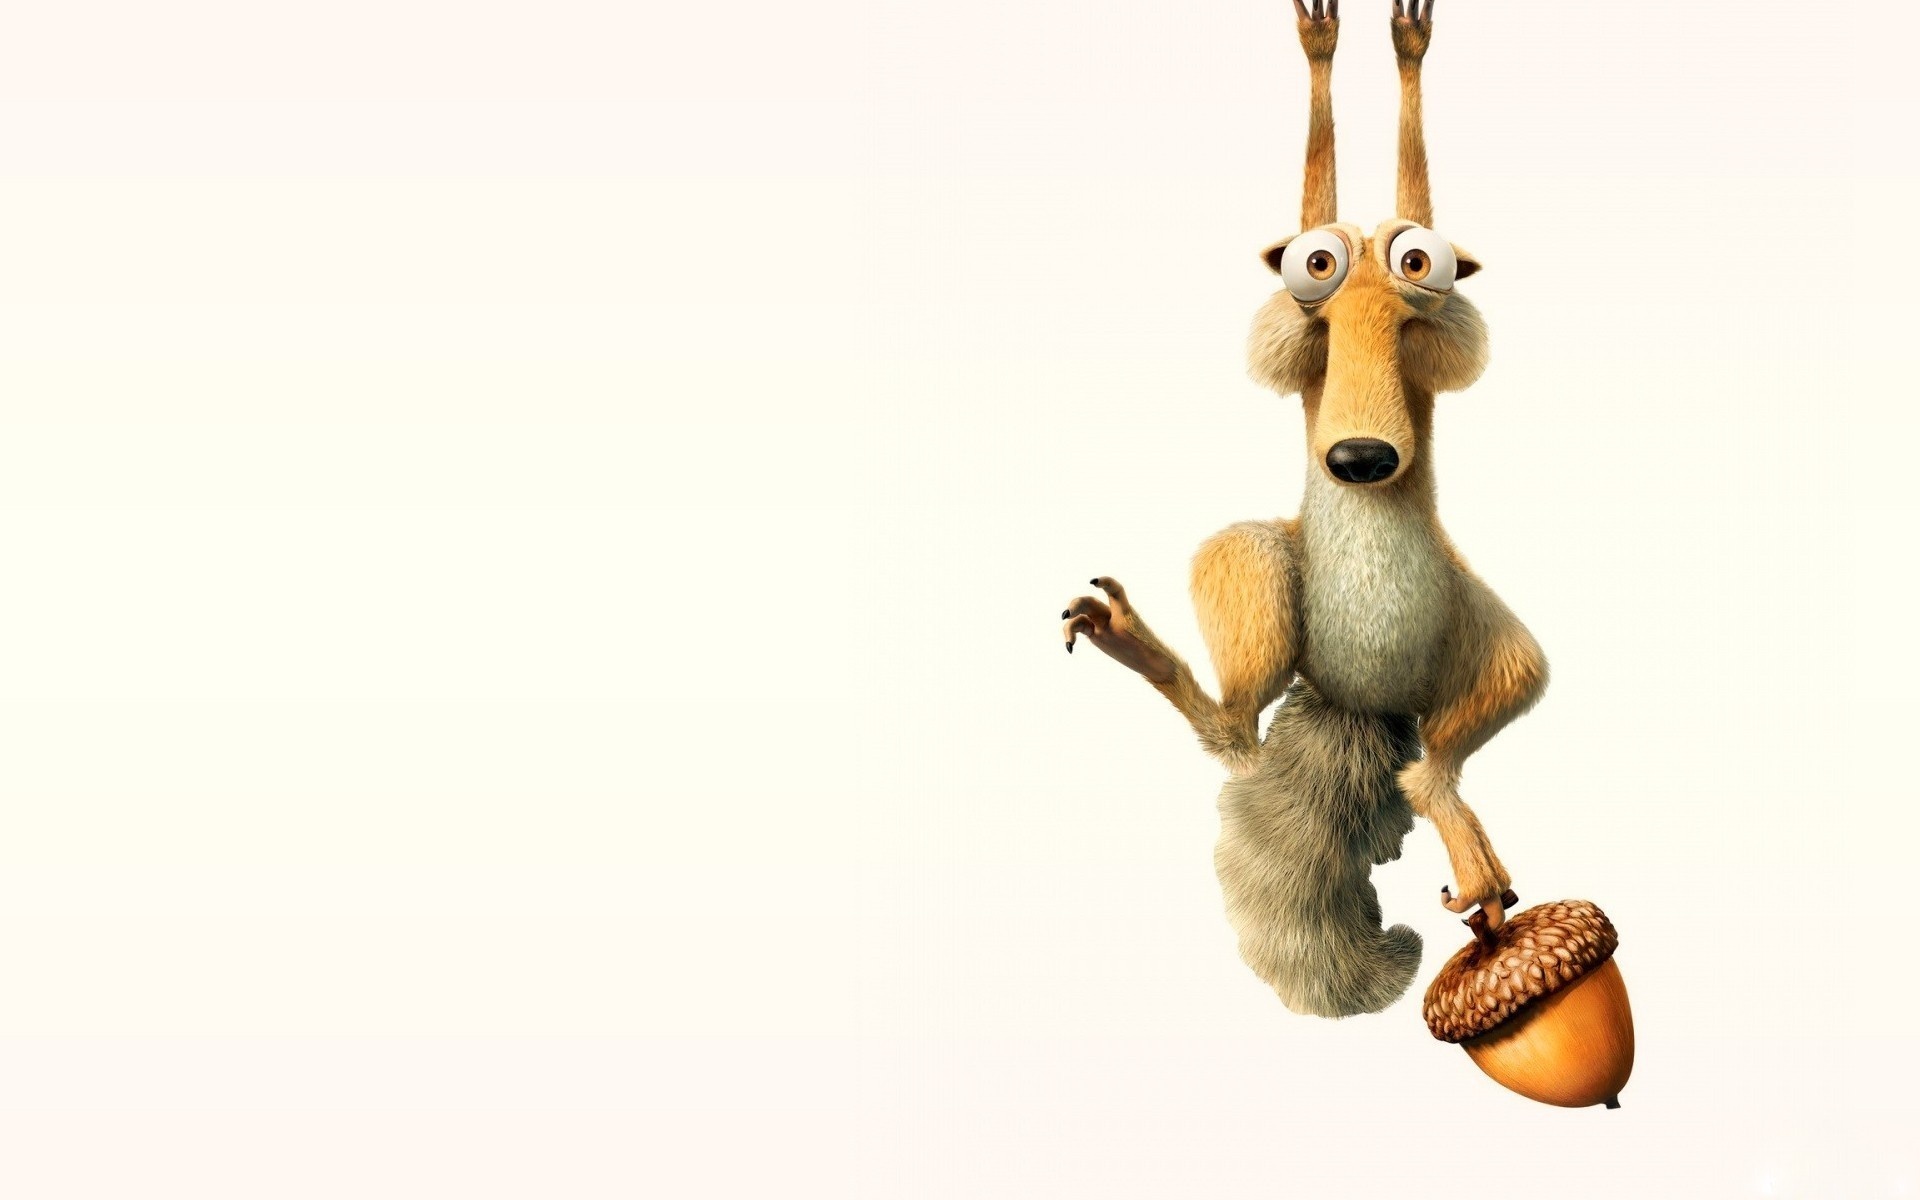 Movie Ice Age HD Wallpaper Background Image. 